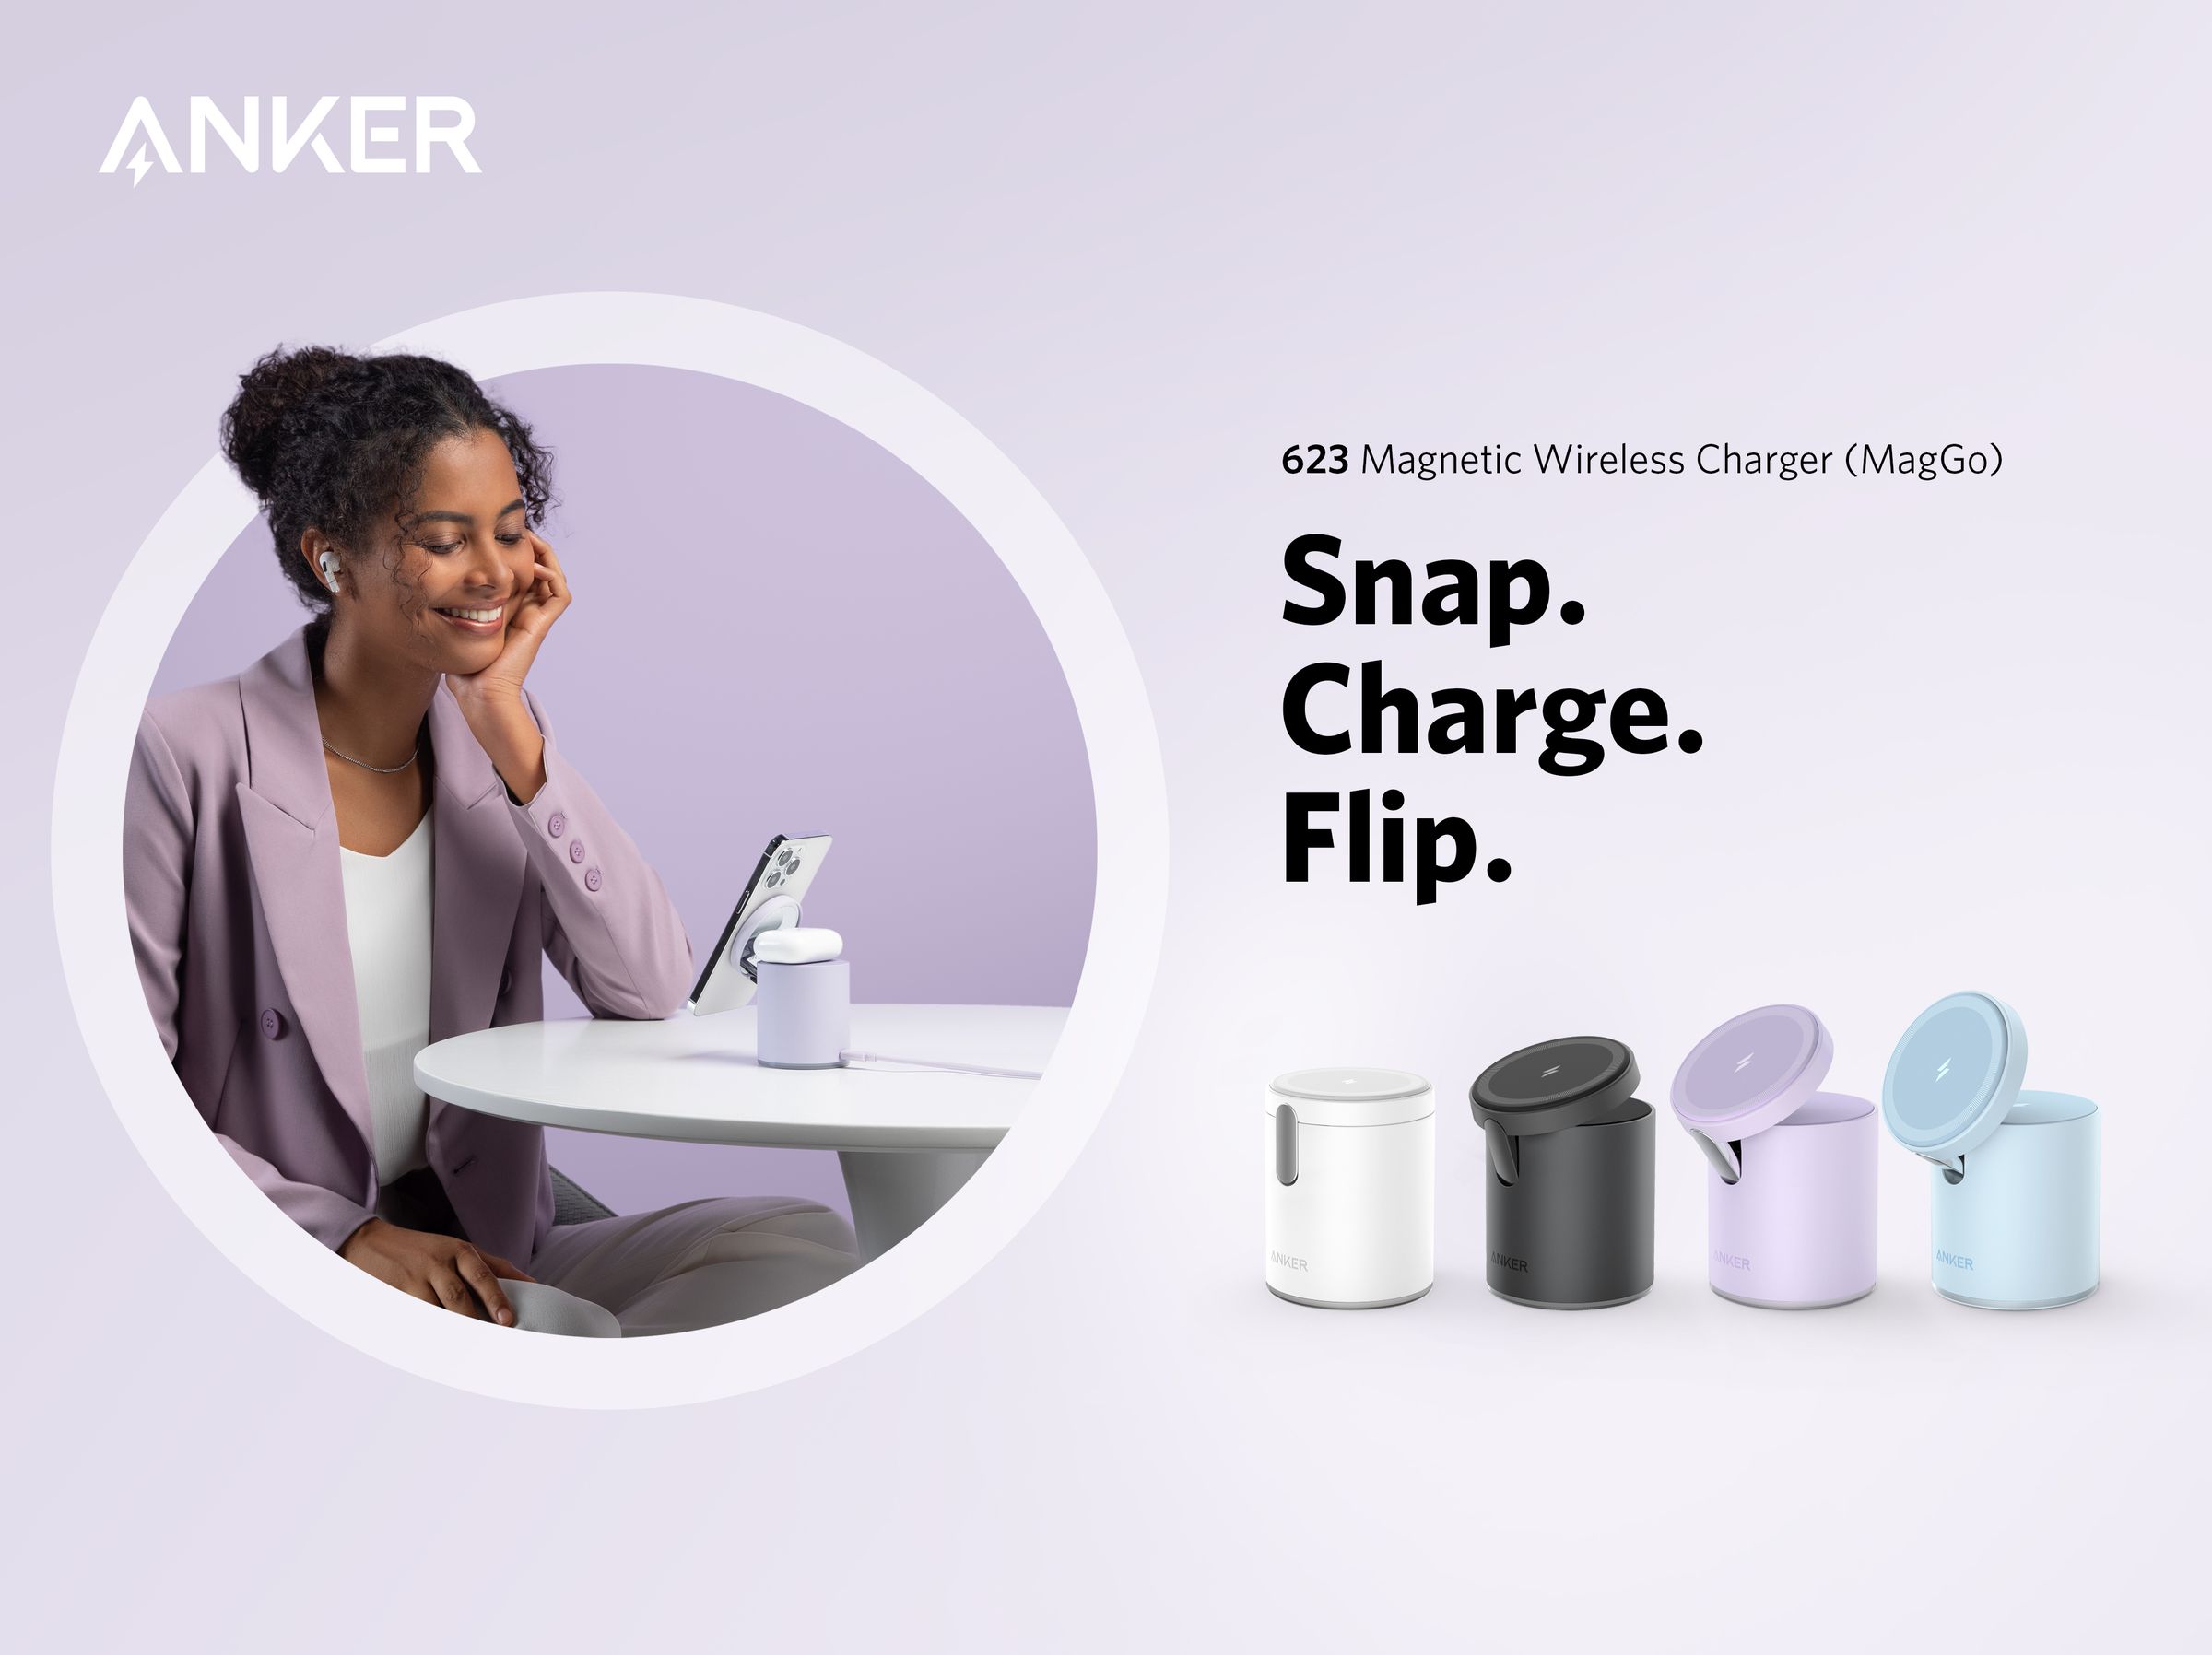 Anker’s MagGo Magnetic Wireless Charger (623) is a colorful and adjustable MagSafe-friendly stand and charger.